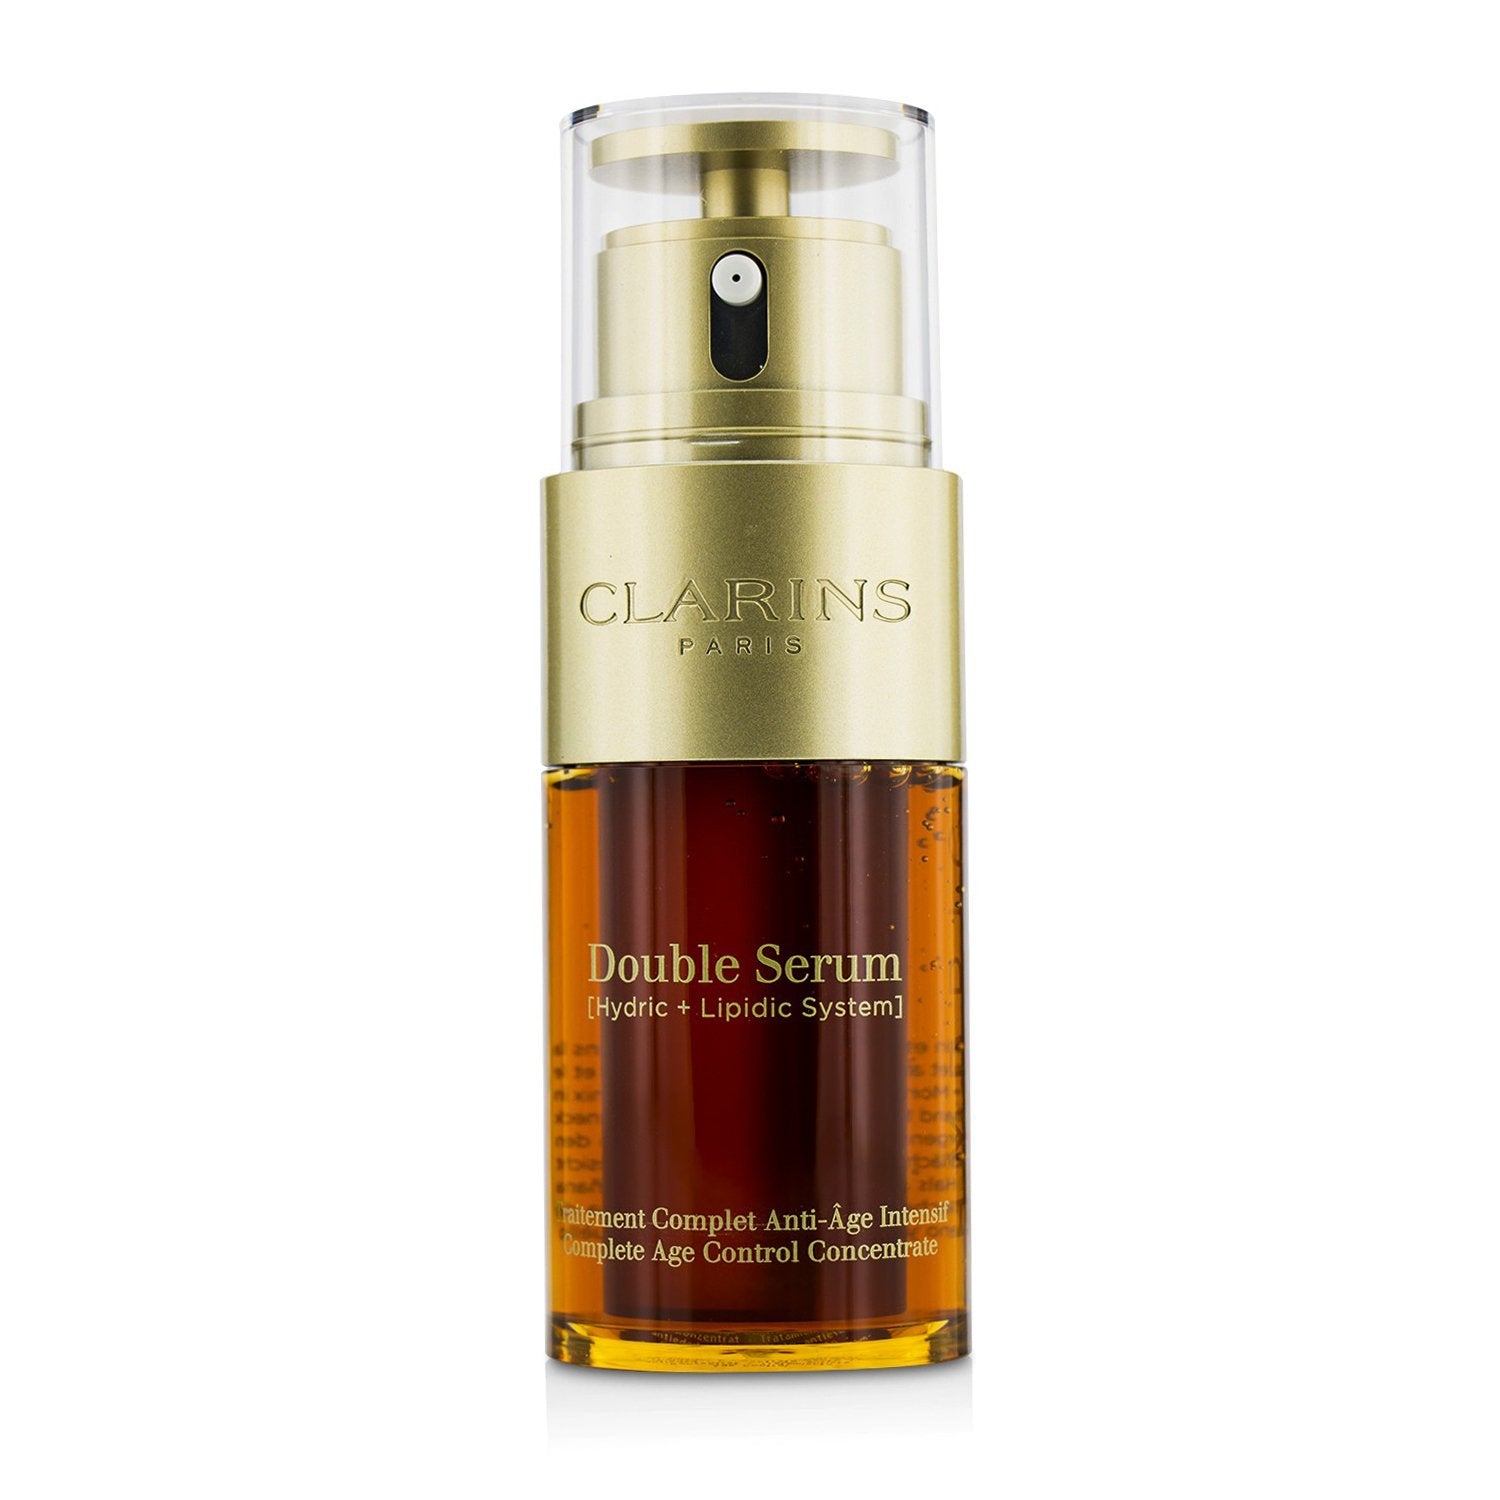 Clarins Double Serum (Hydric + Lipidic System) Complete Age Control Co –  Fresh Beauty Co. USA